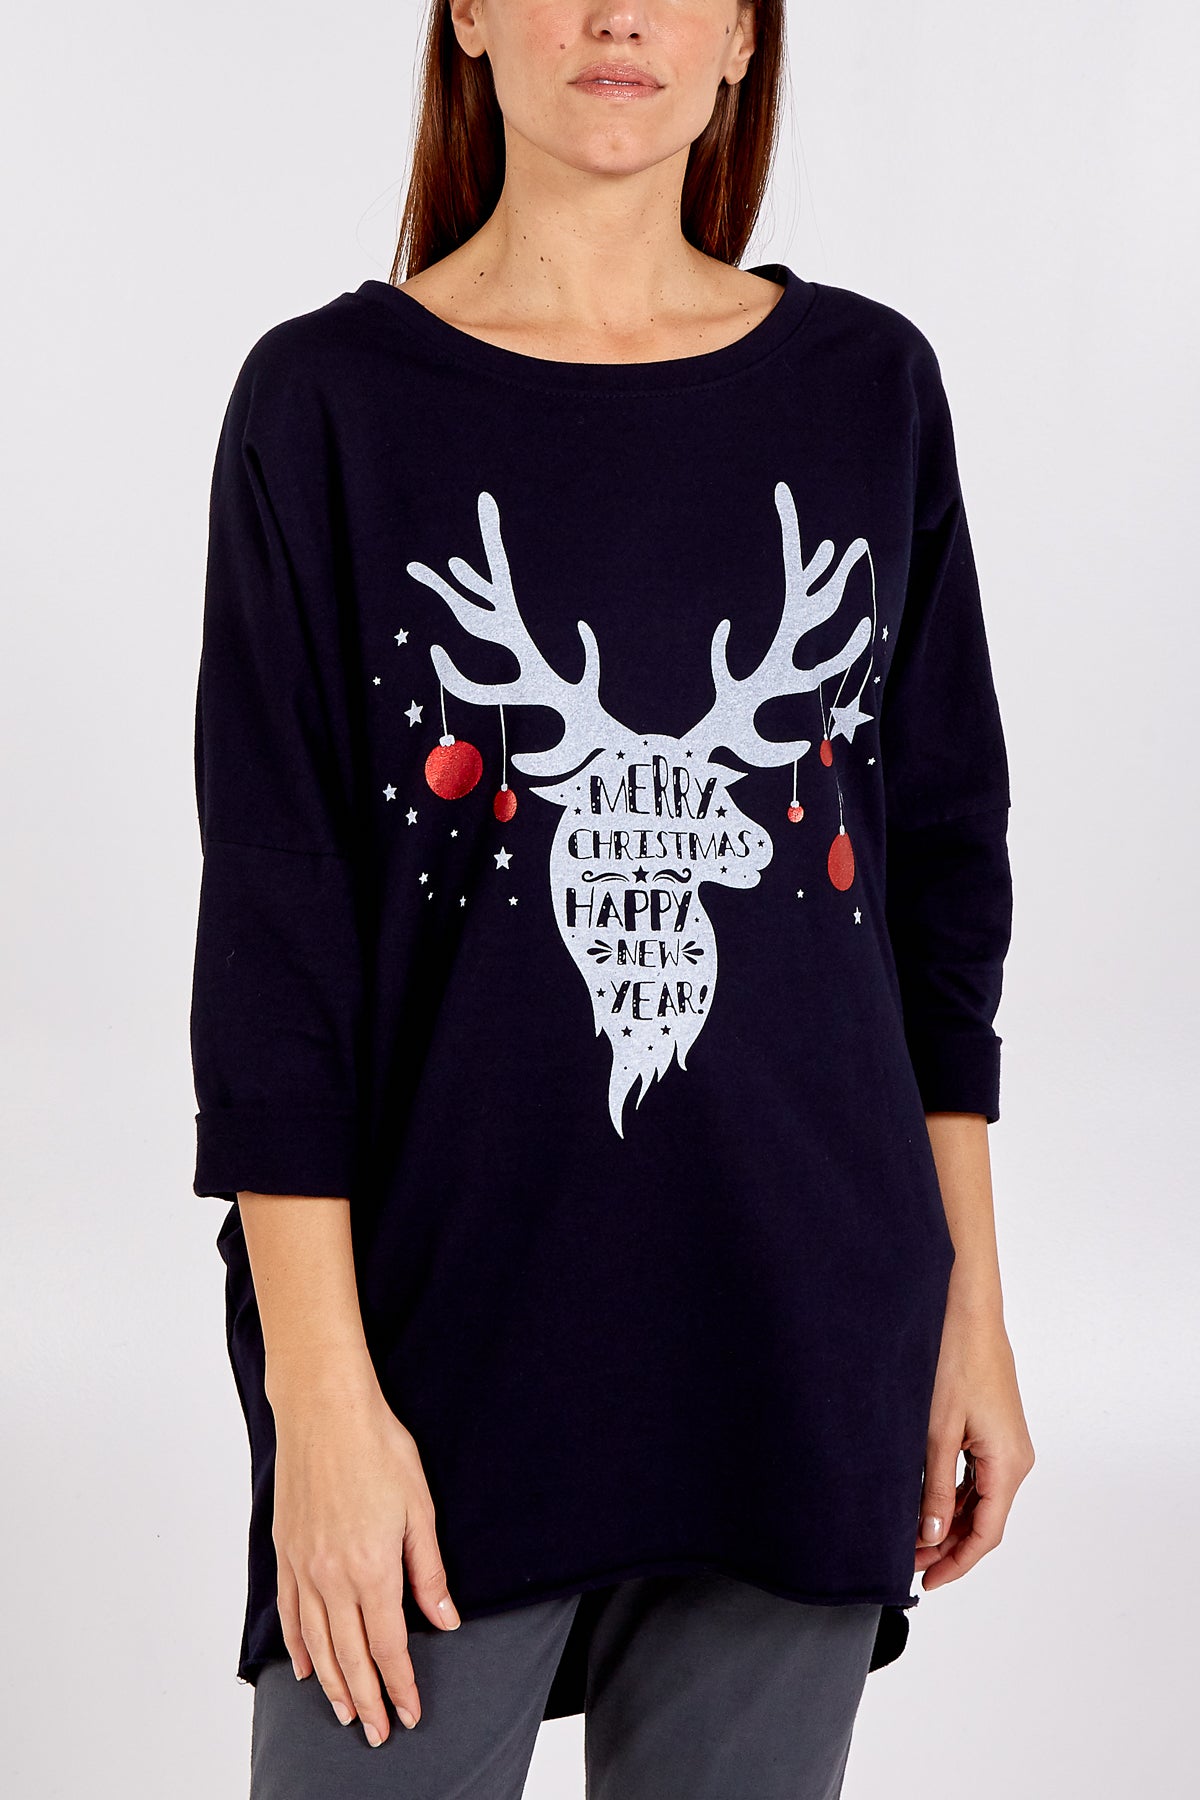 "Merry Christmas And Happy New Year"  Reindeer Print, Round Neck, Oversized Jumper - Made in Italy